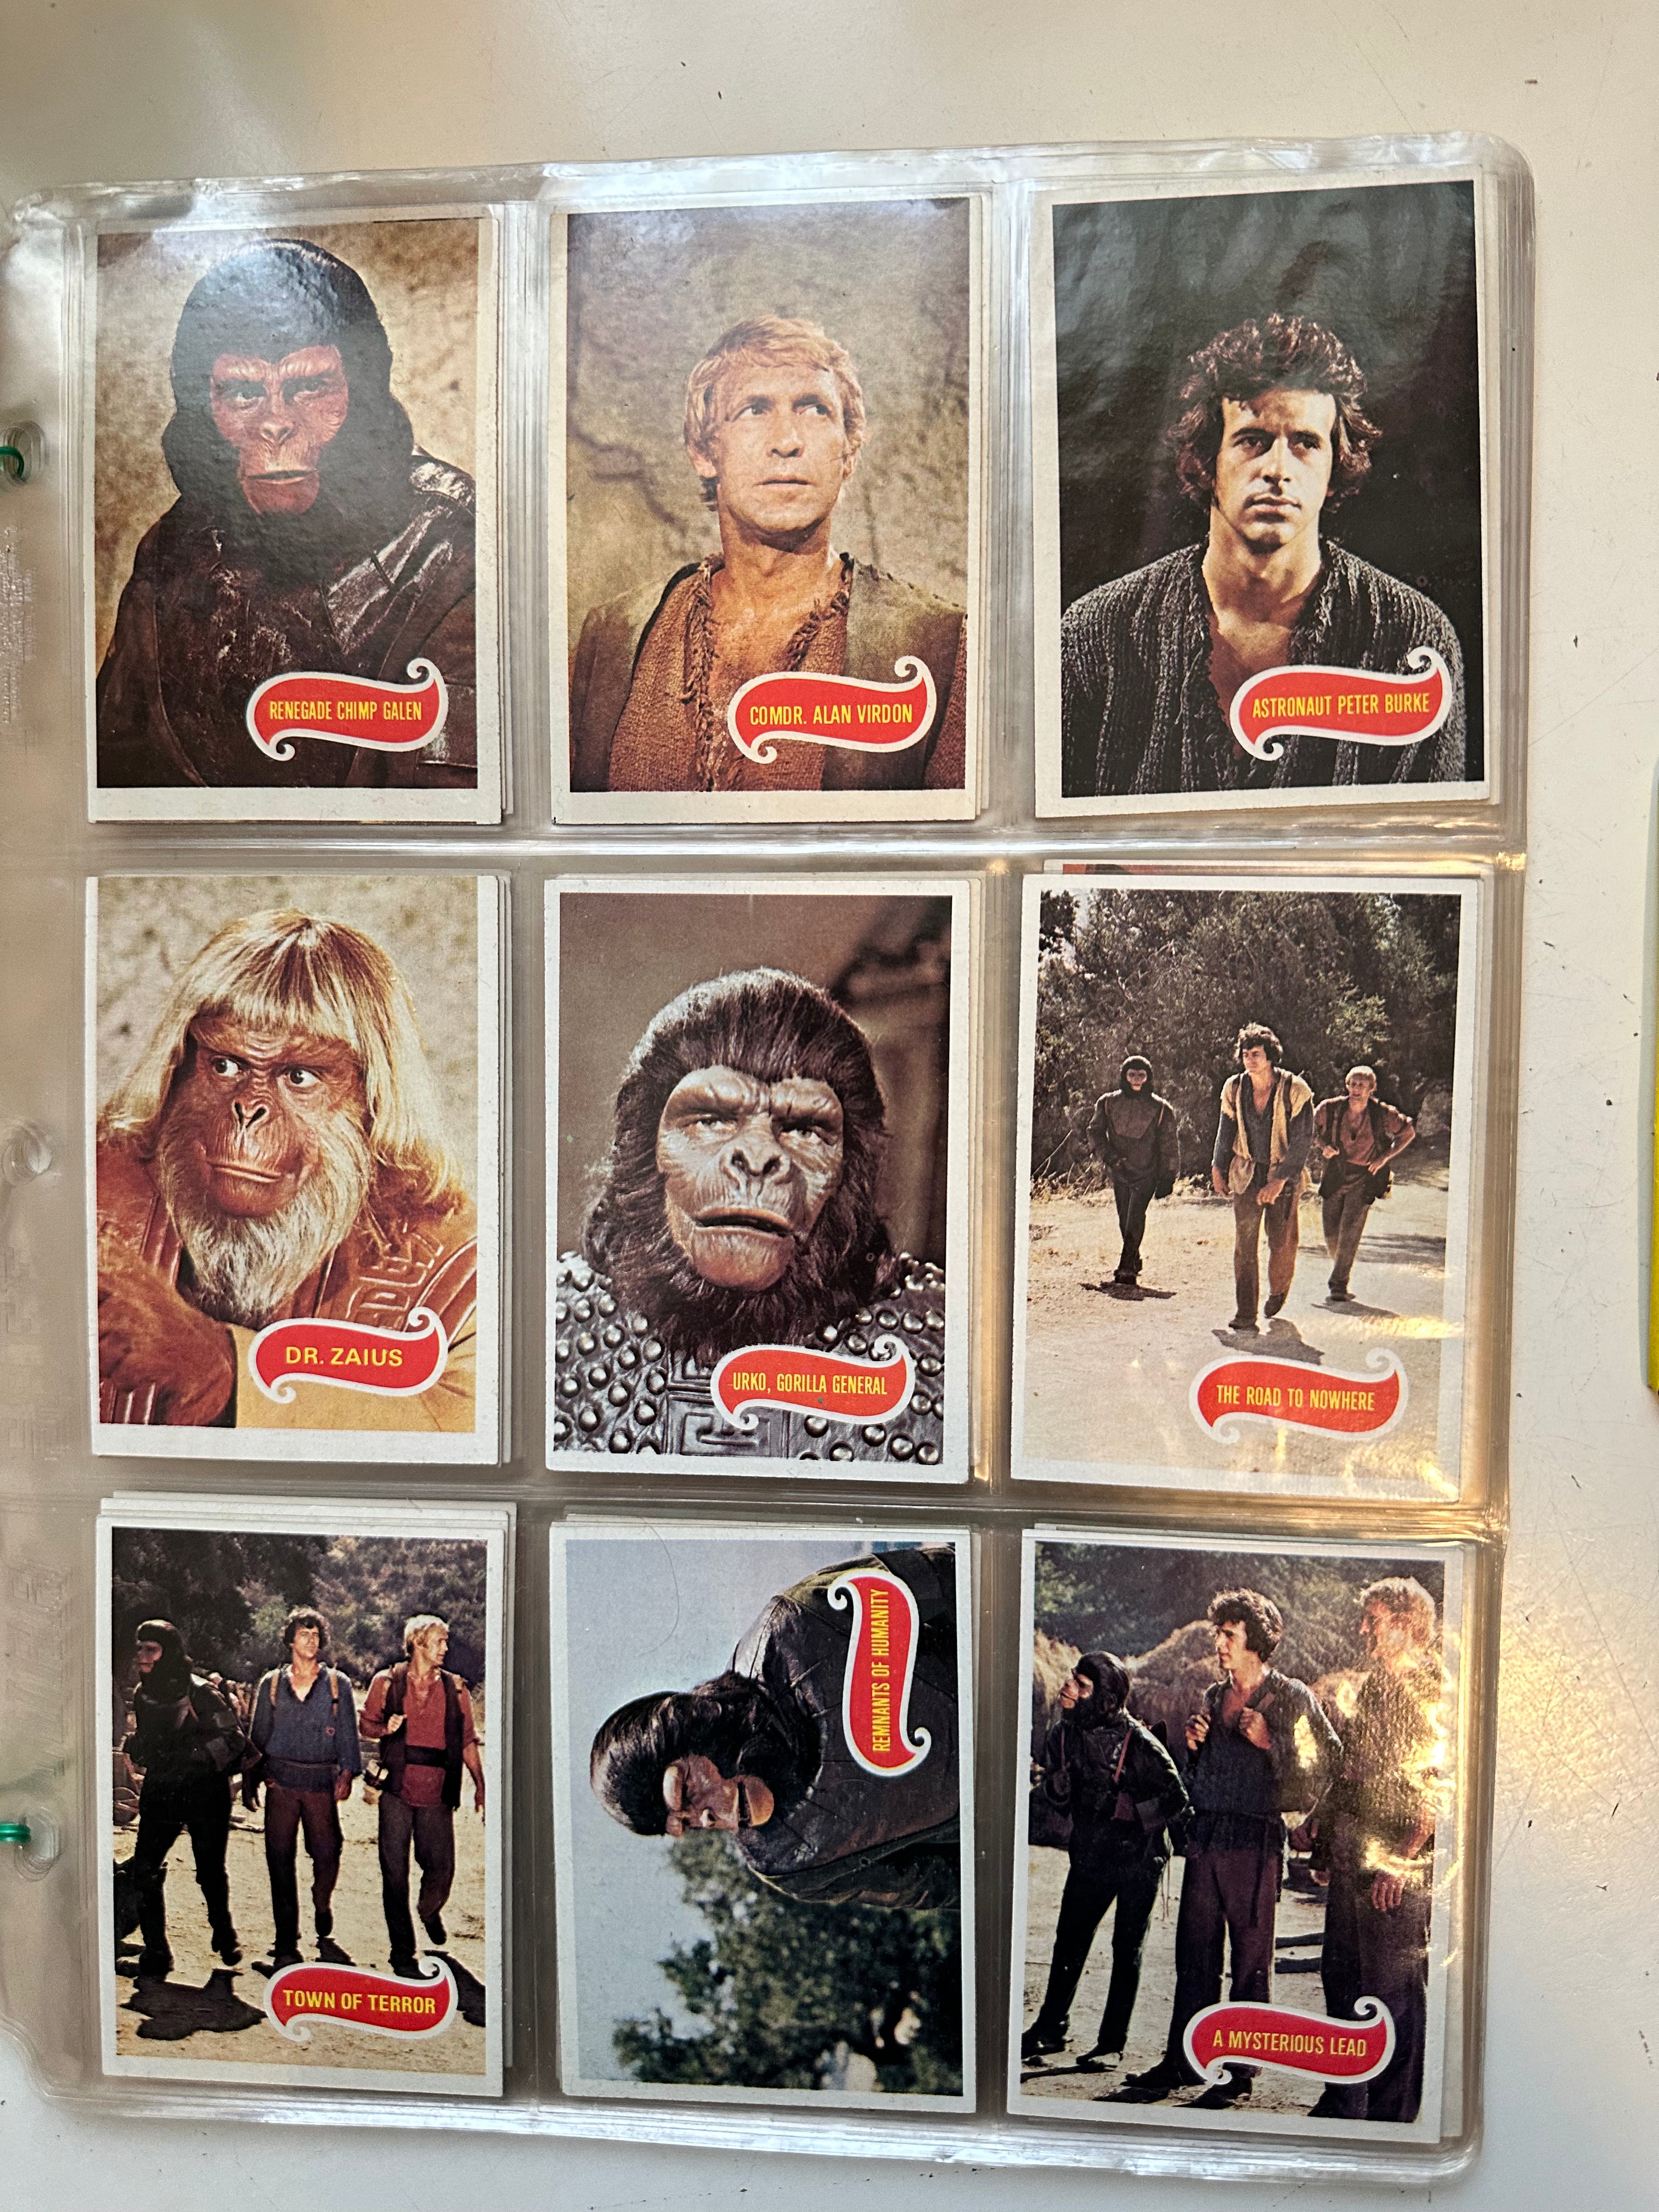 Planet of the Apes TV series cards set with wrapper 1974